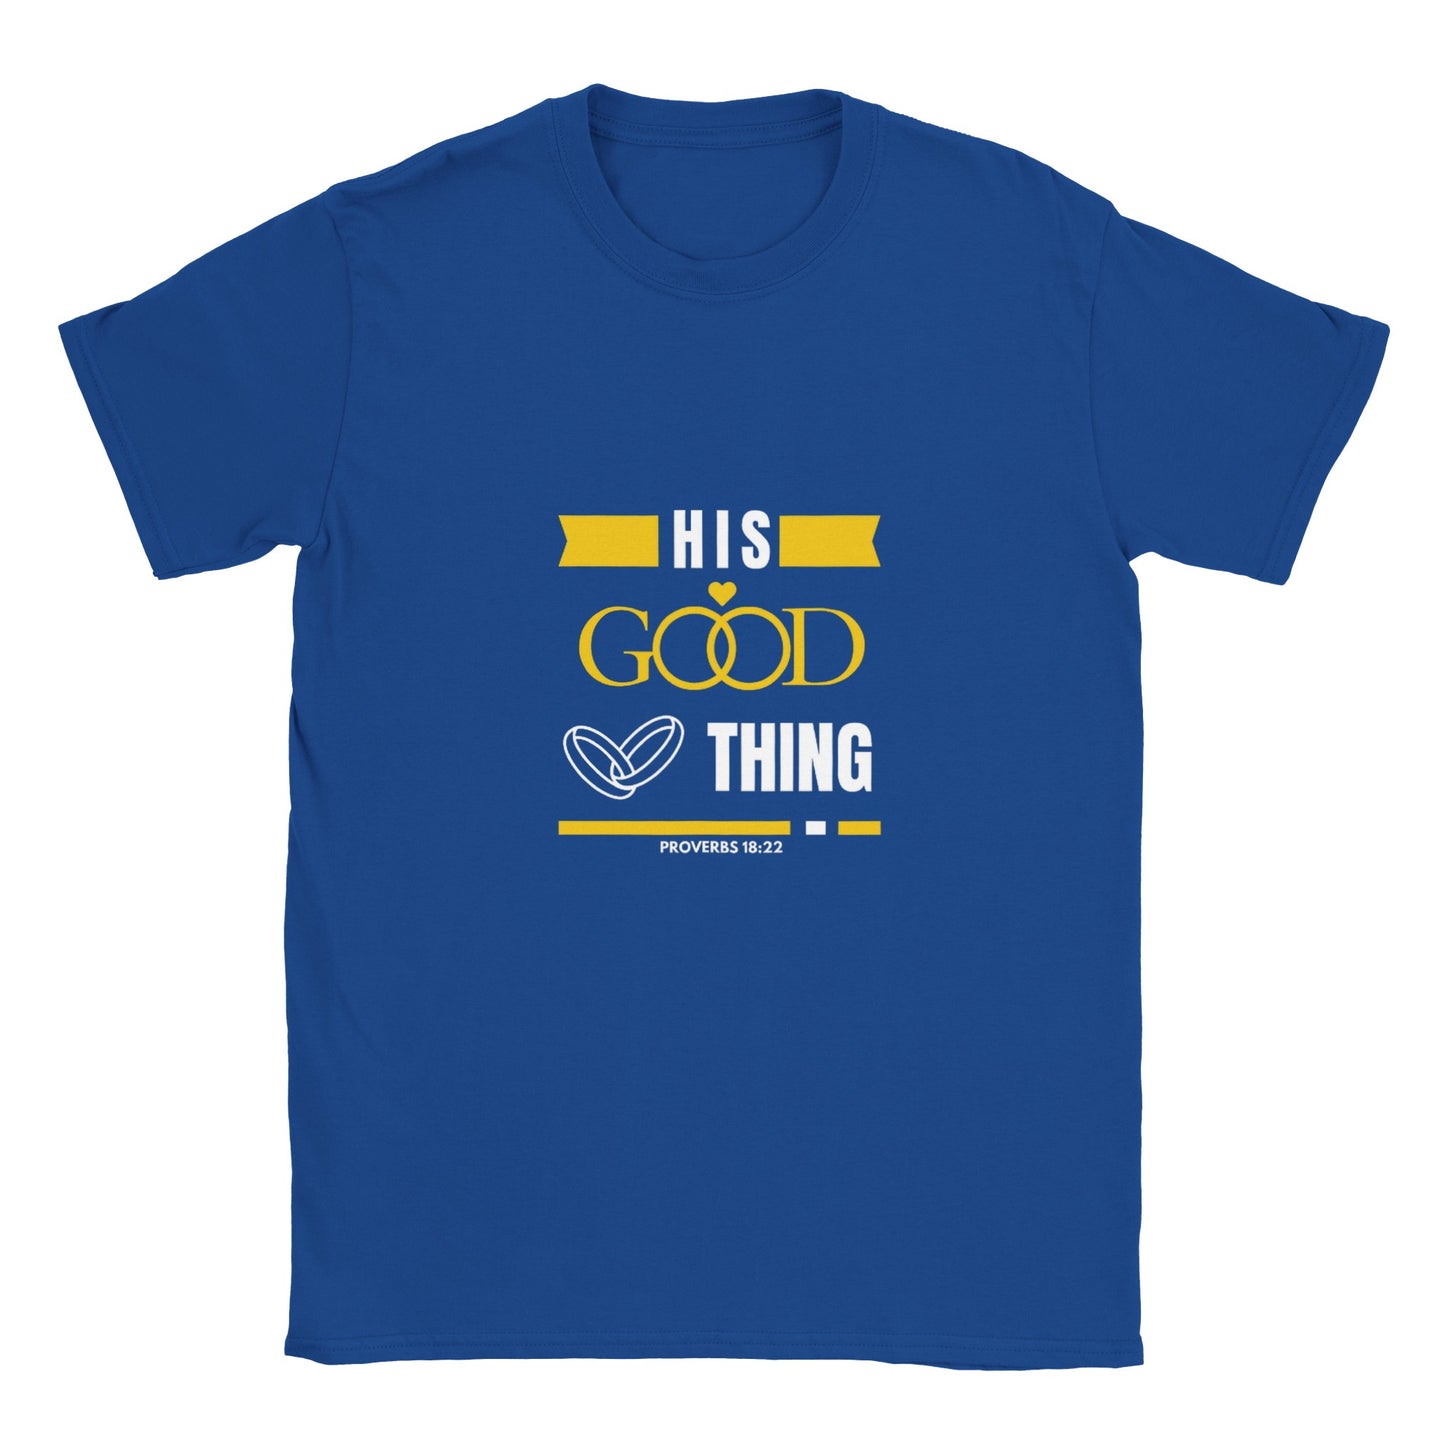 His Good Thing Couples T-shirt (Hers)